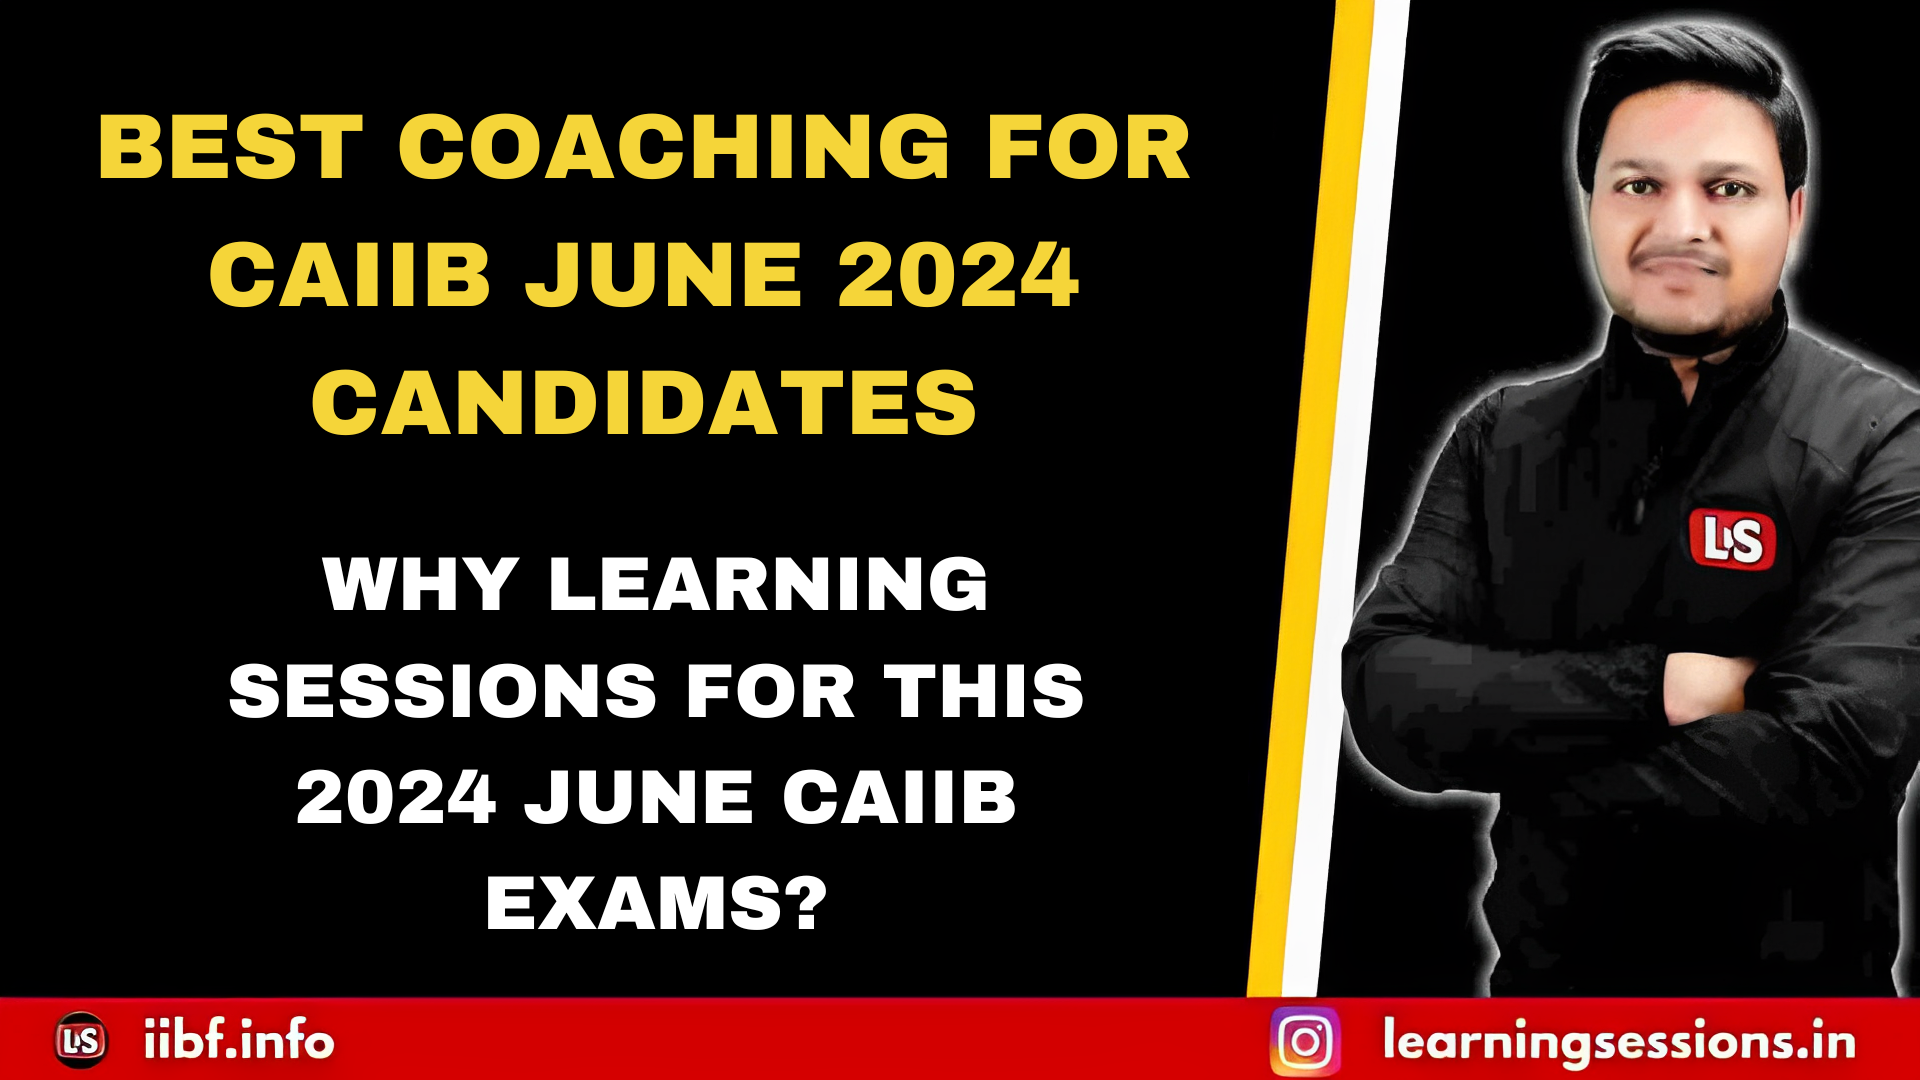 WHY LEARNING SESSIONS FOR THIS 2024 JUNE CAIIB EXAMS?